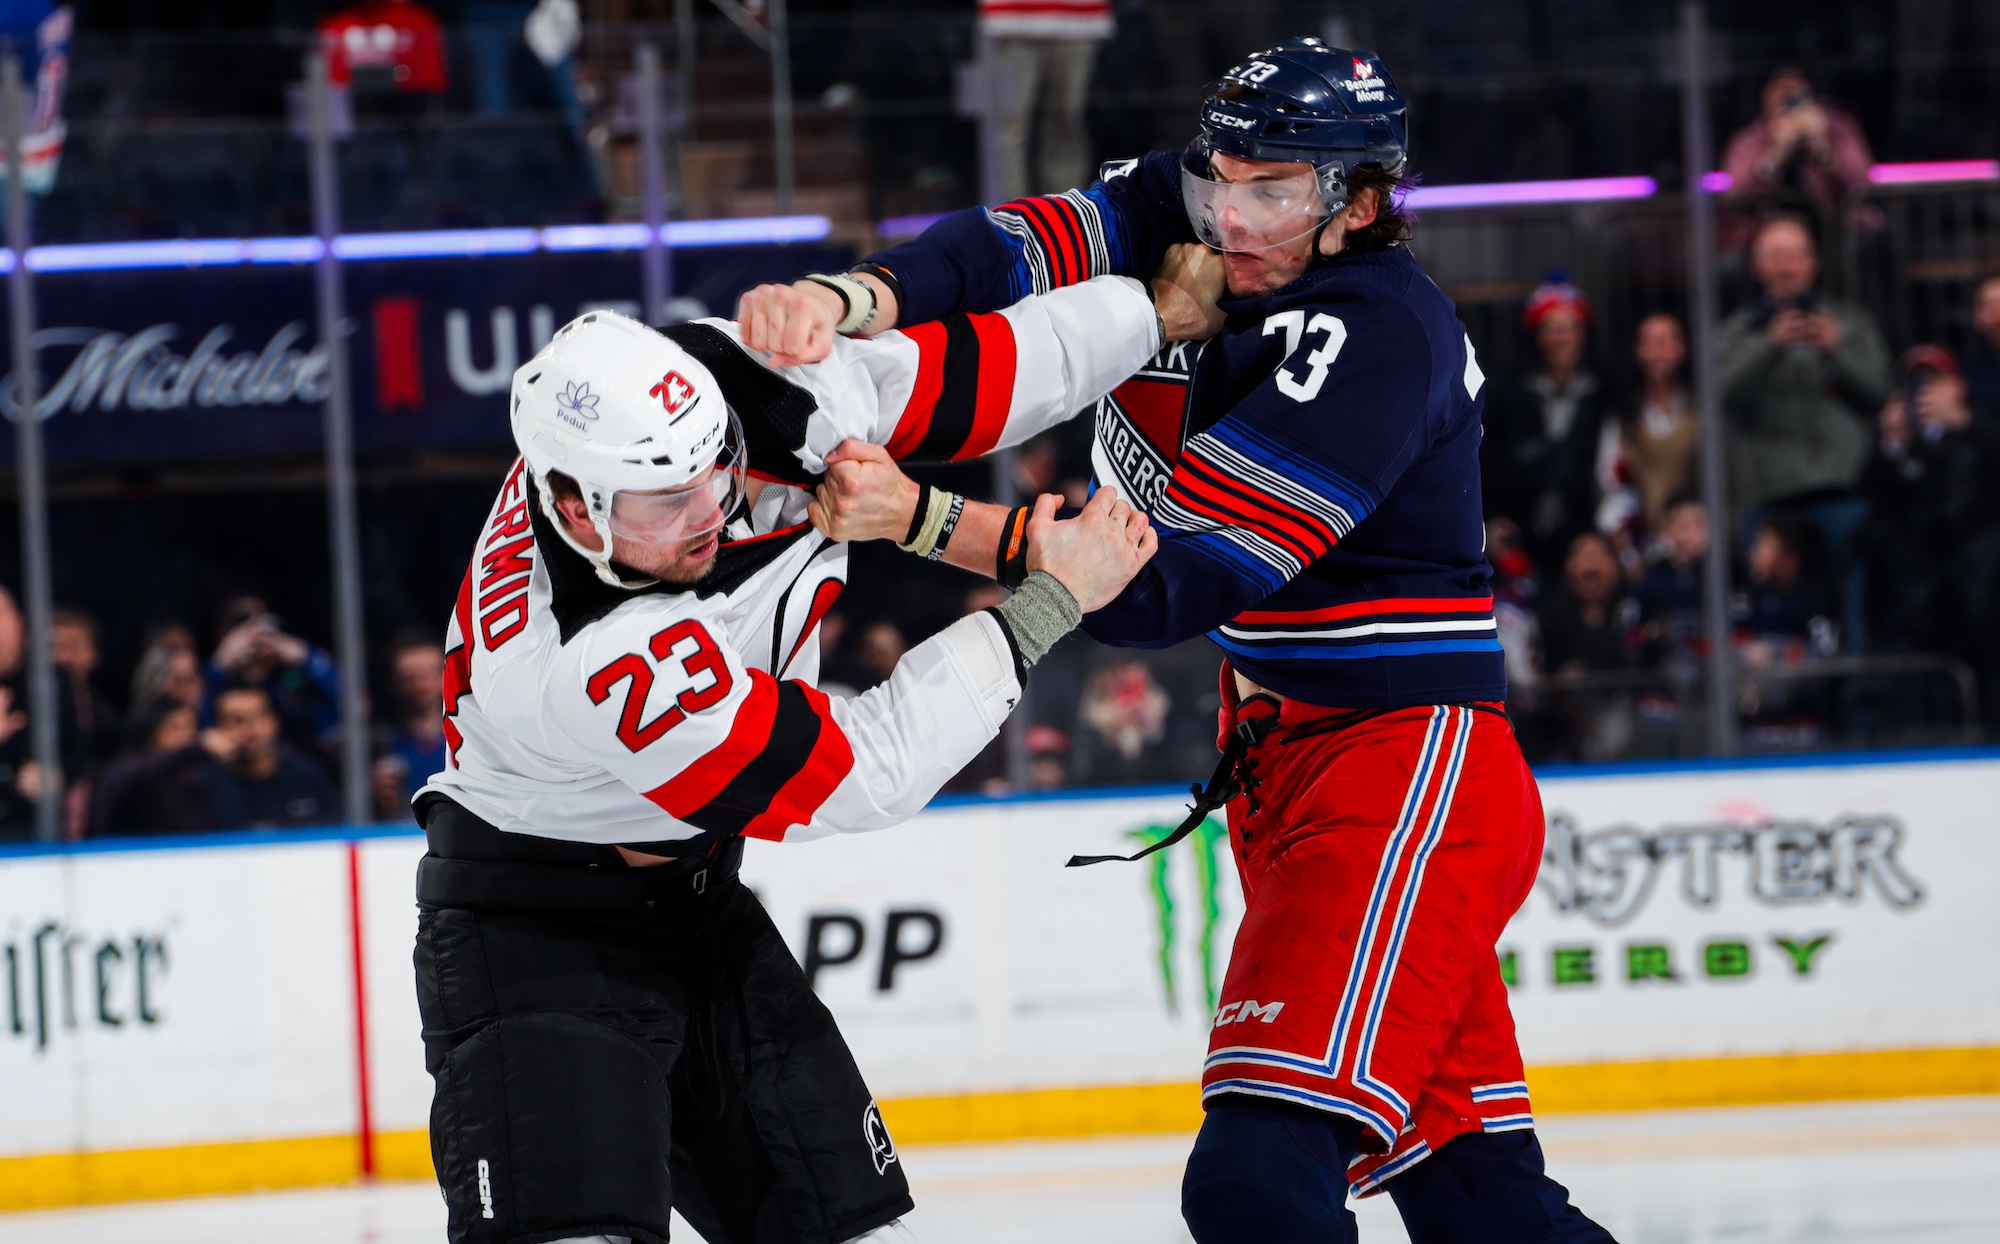 NEW YORK, NEW YORK - APRIL 03: Matt Rempe #73 of the New York Rangers fights Kurtis MacDermid #23 of the New Jersey Devils at Madison Square Garden on April 3, 2024 in New York City. (Photo by Jared Silber/NHLI via Getty Images)